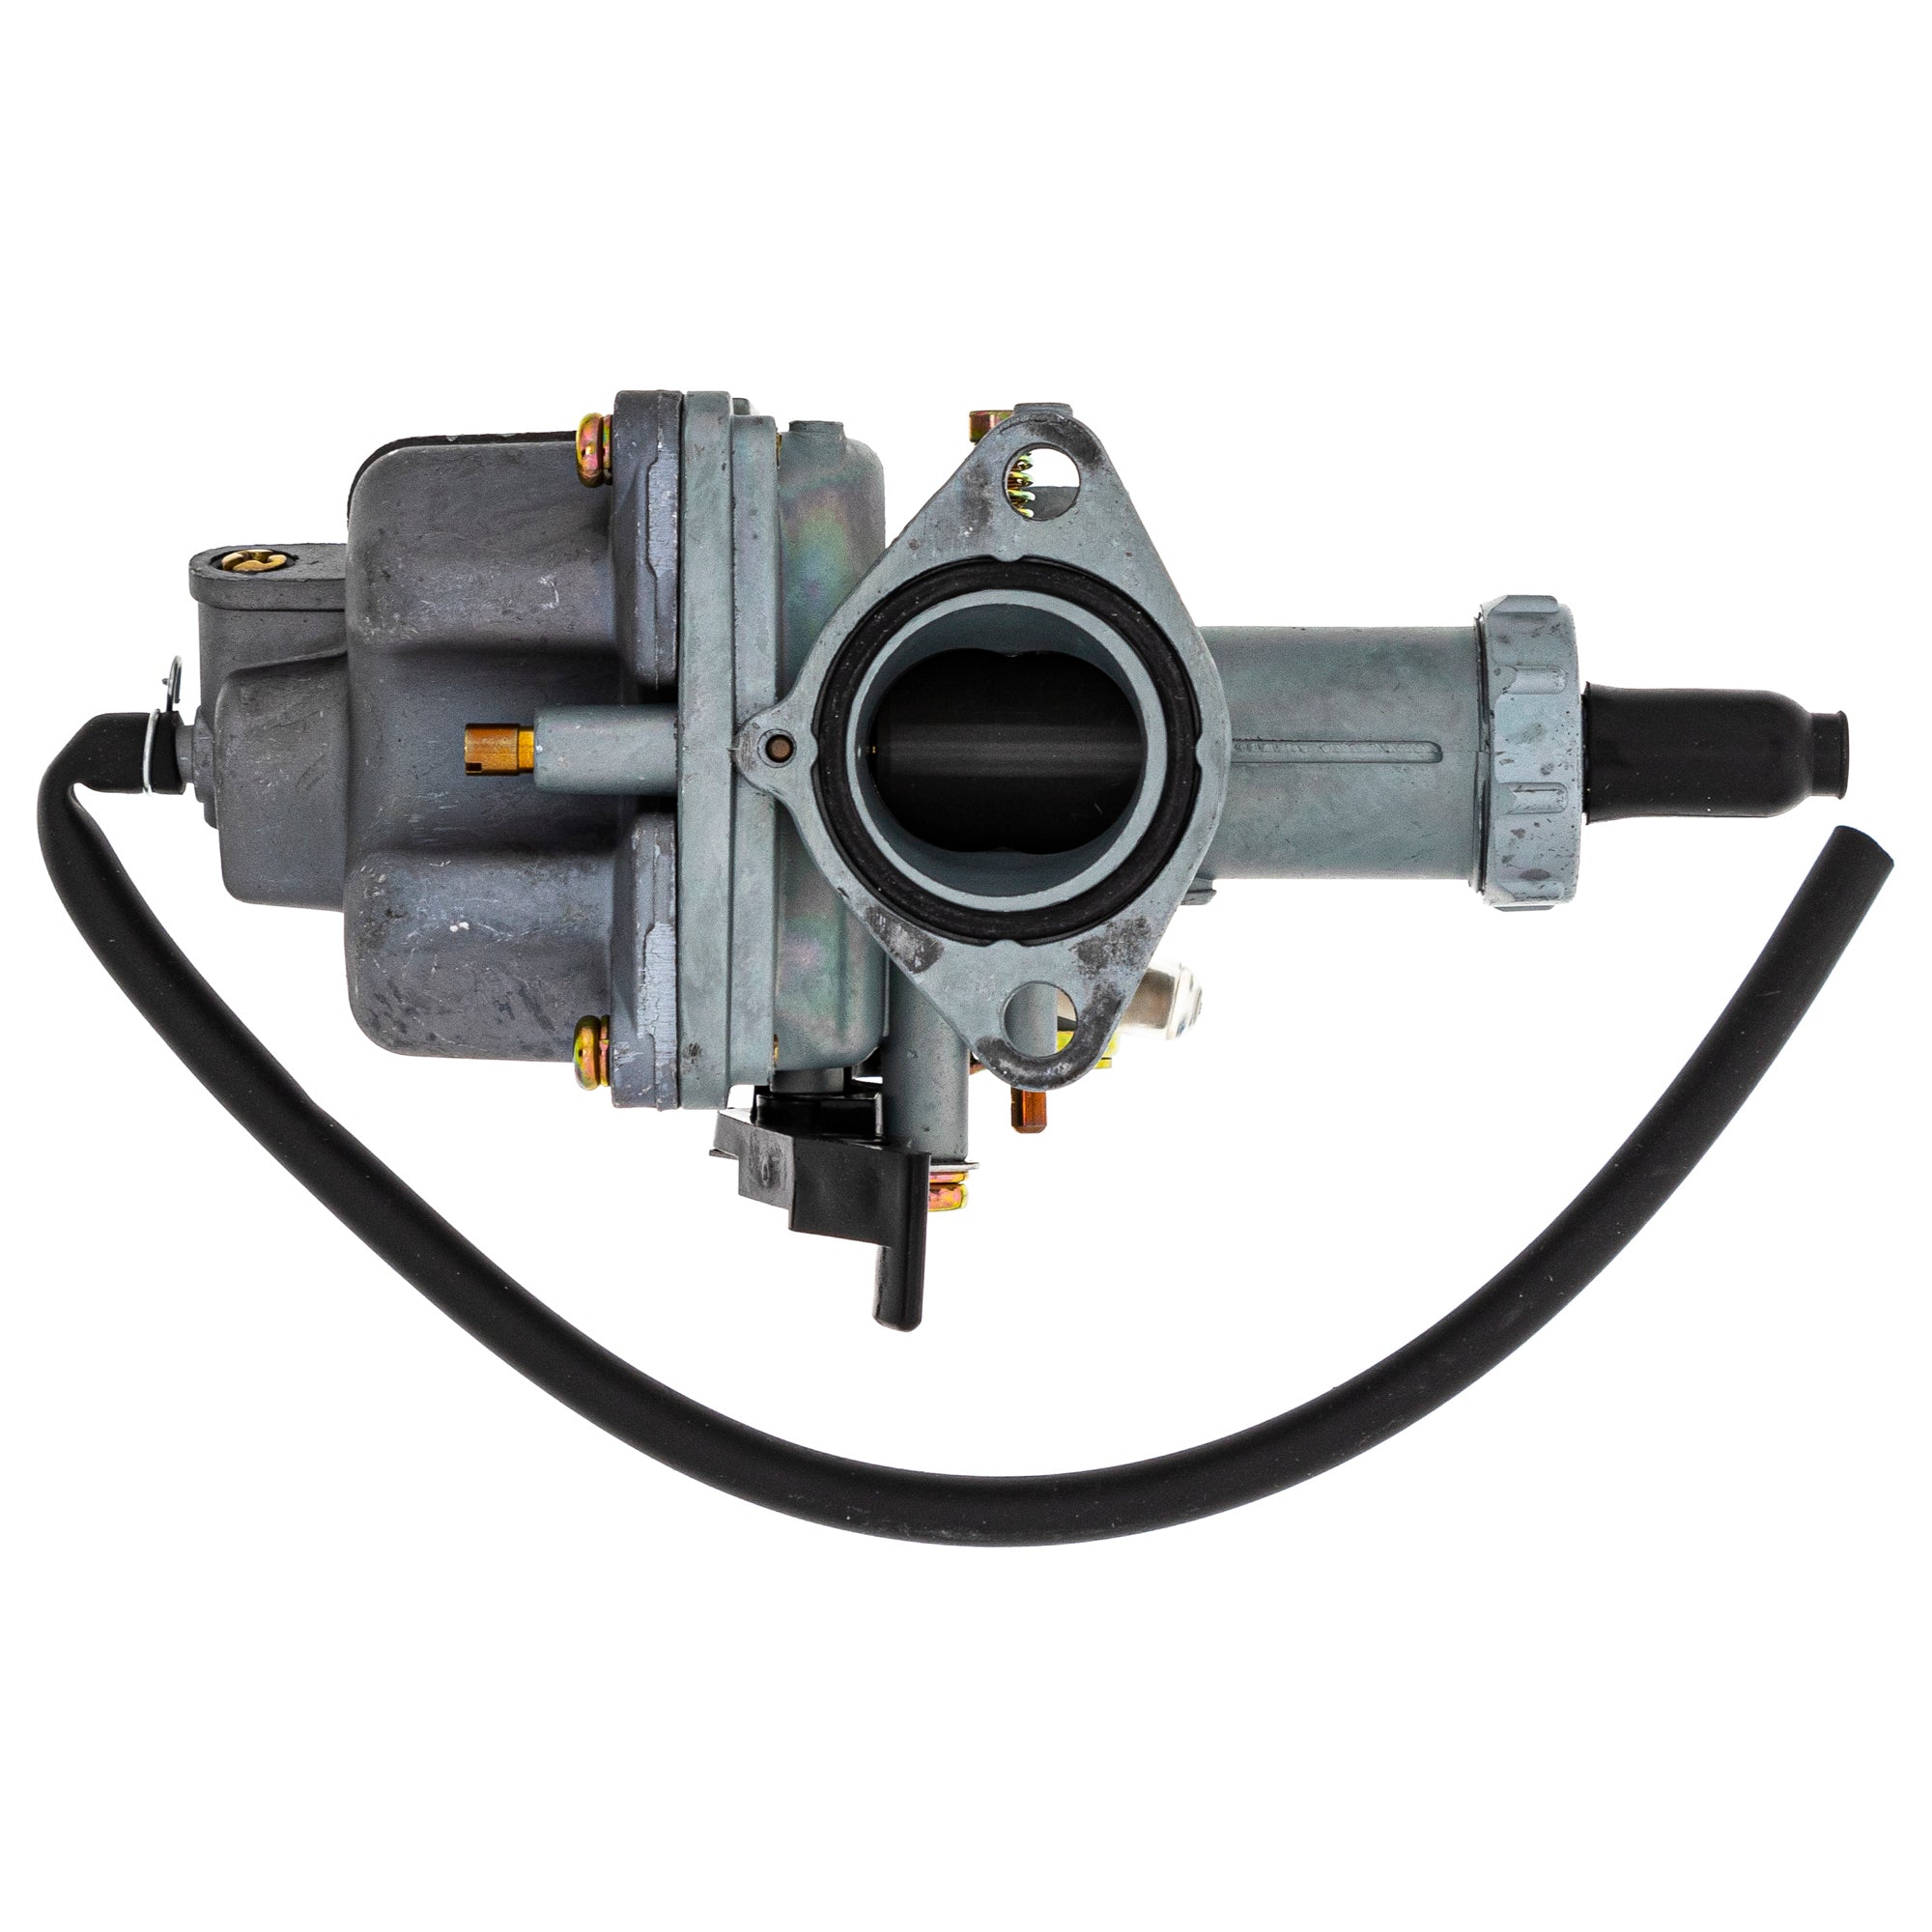 Carburetor Assembly for Honda XR100R 16100-KN4-A10 Motorcycle